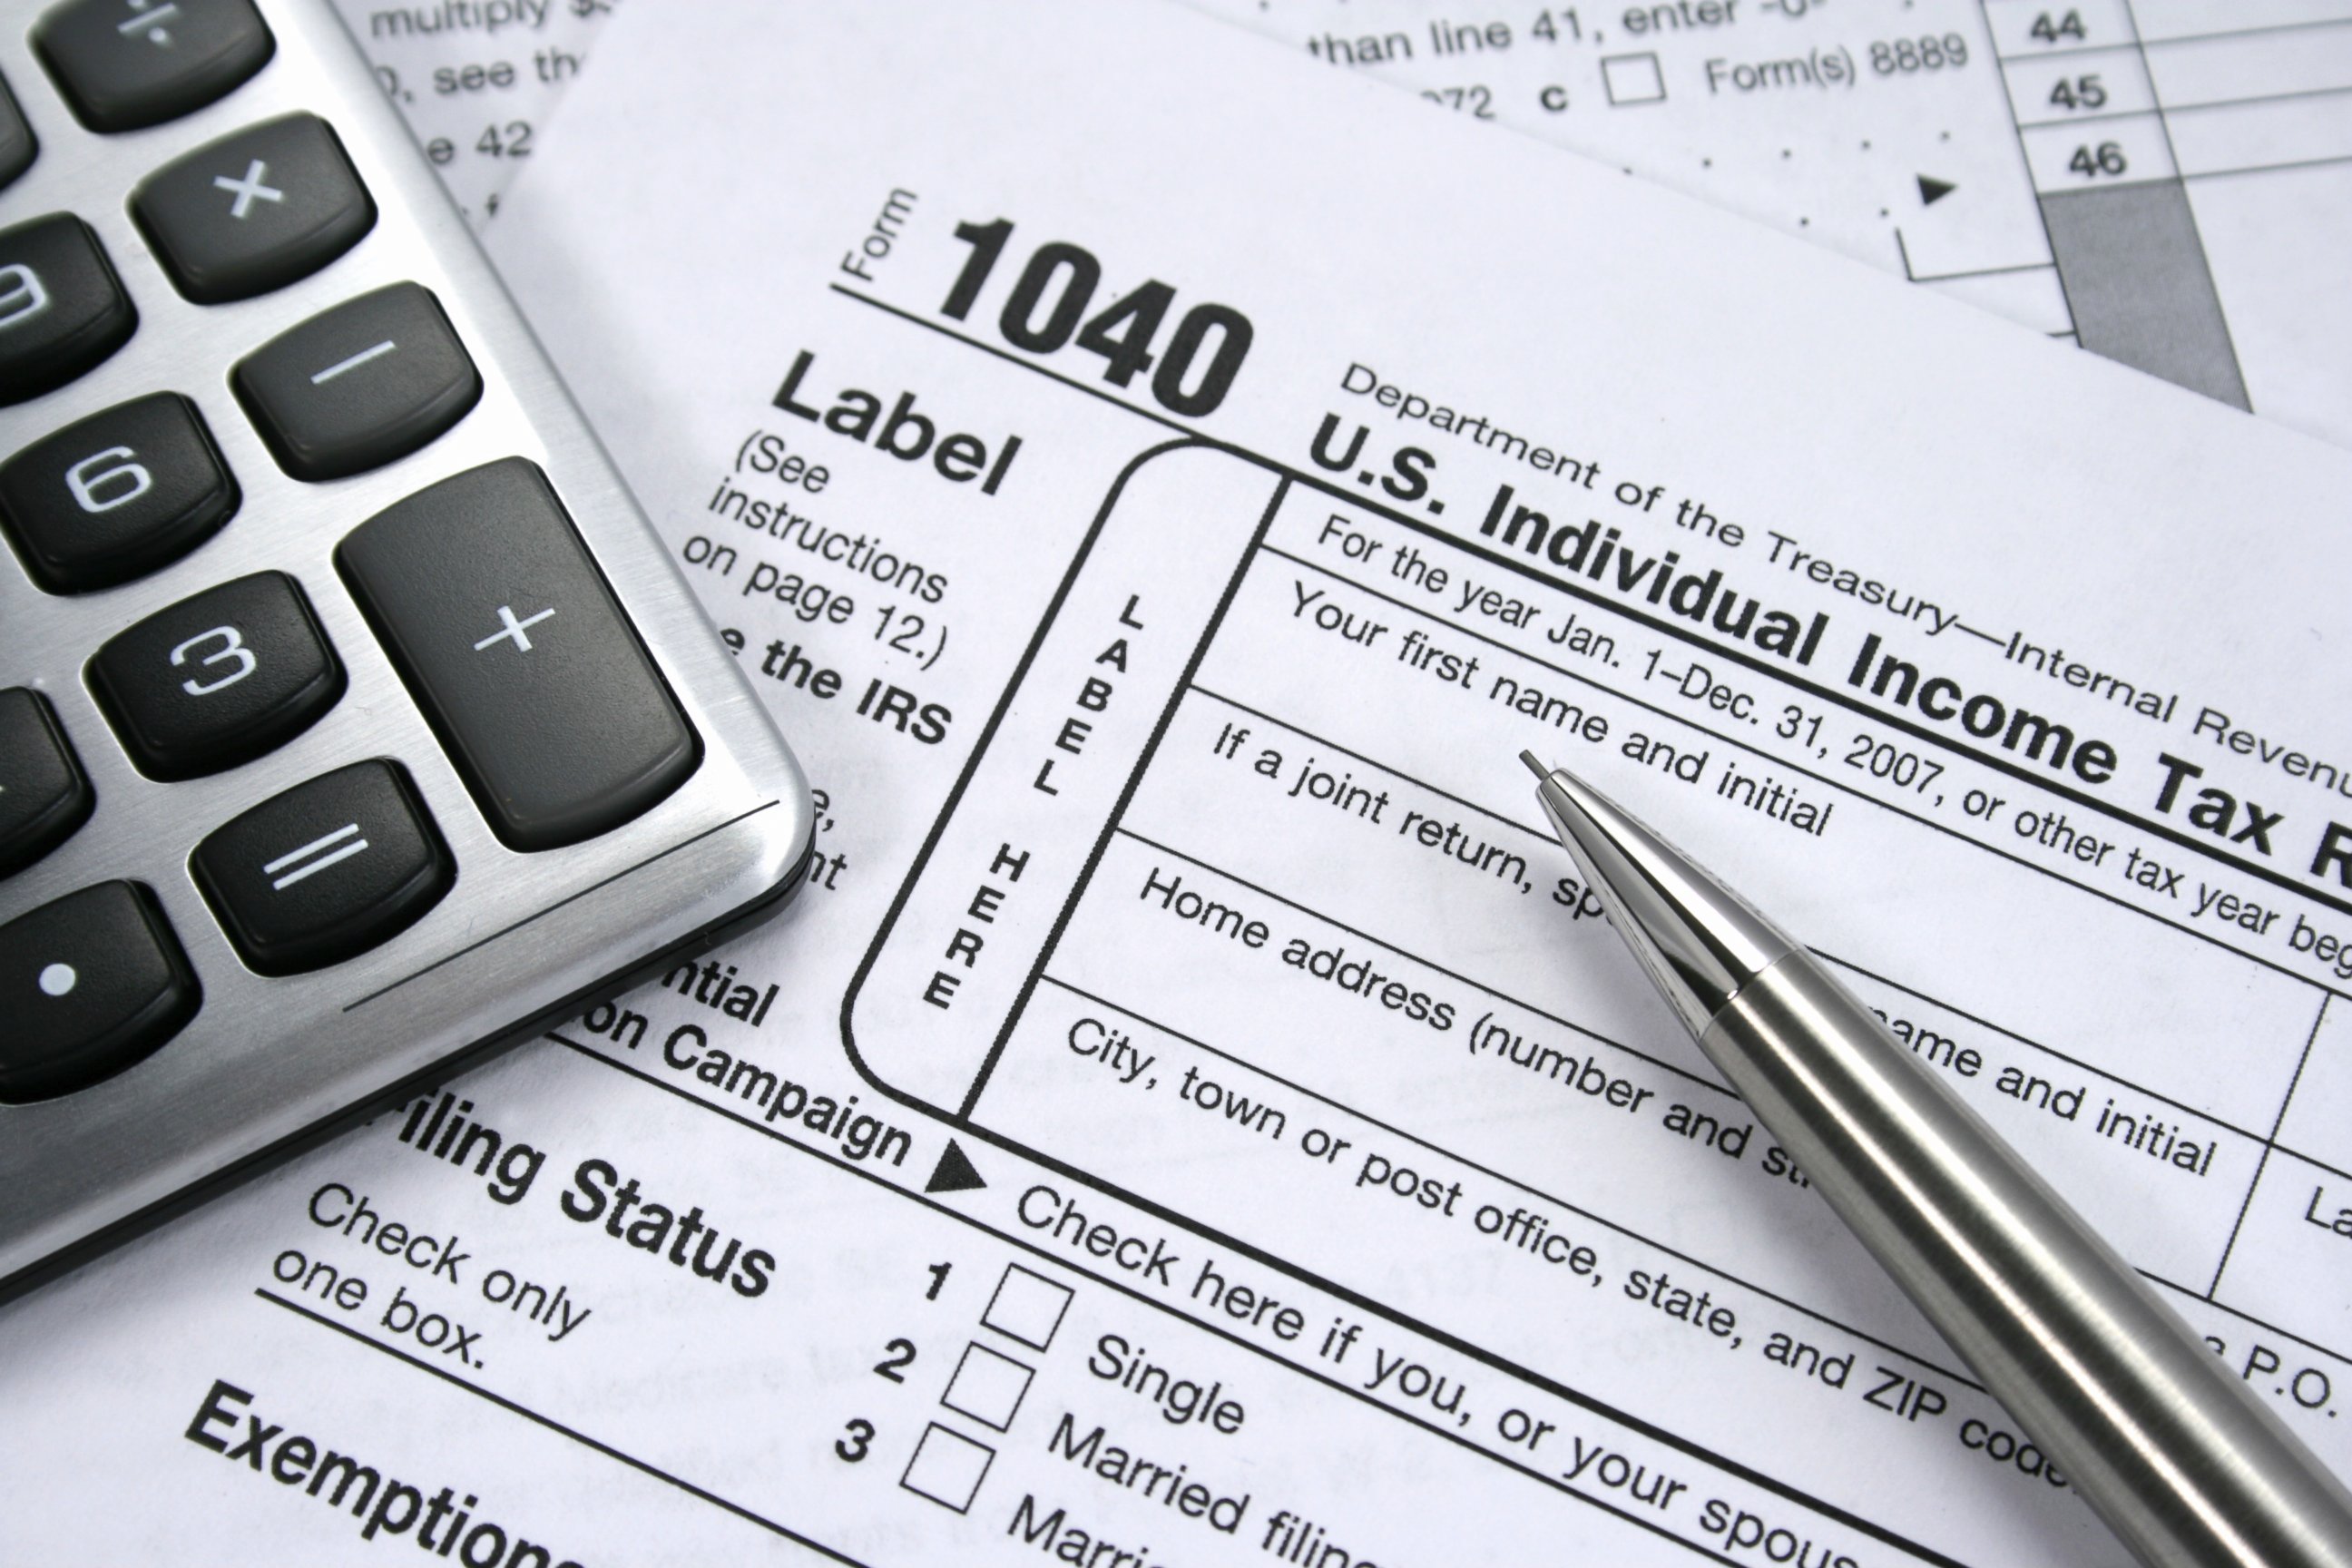 PHOTO: The deadline to file taxes is midnight on April 15.